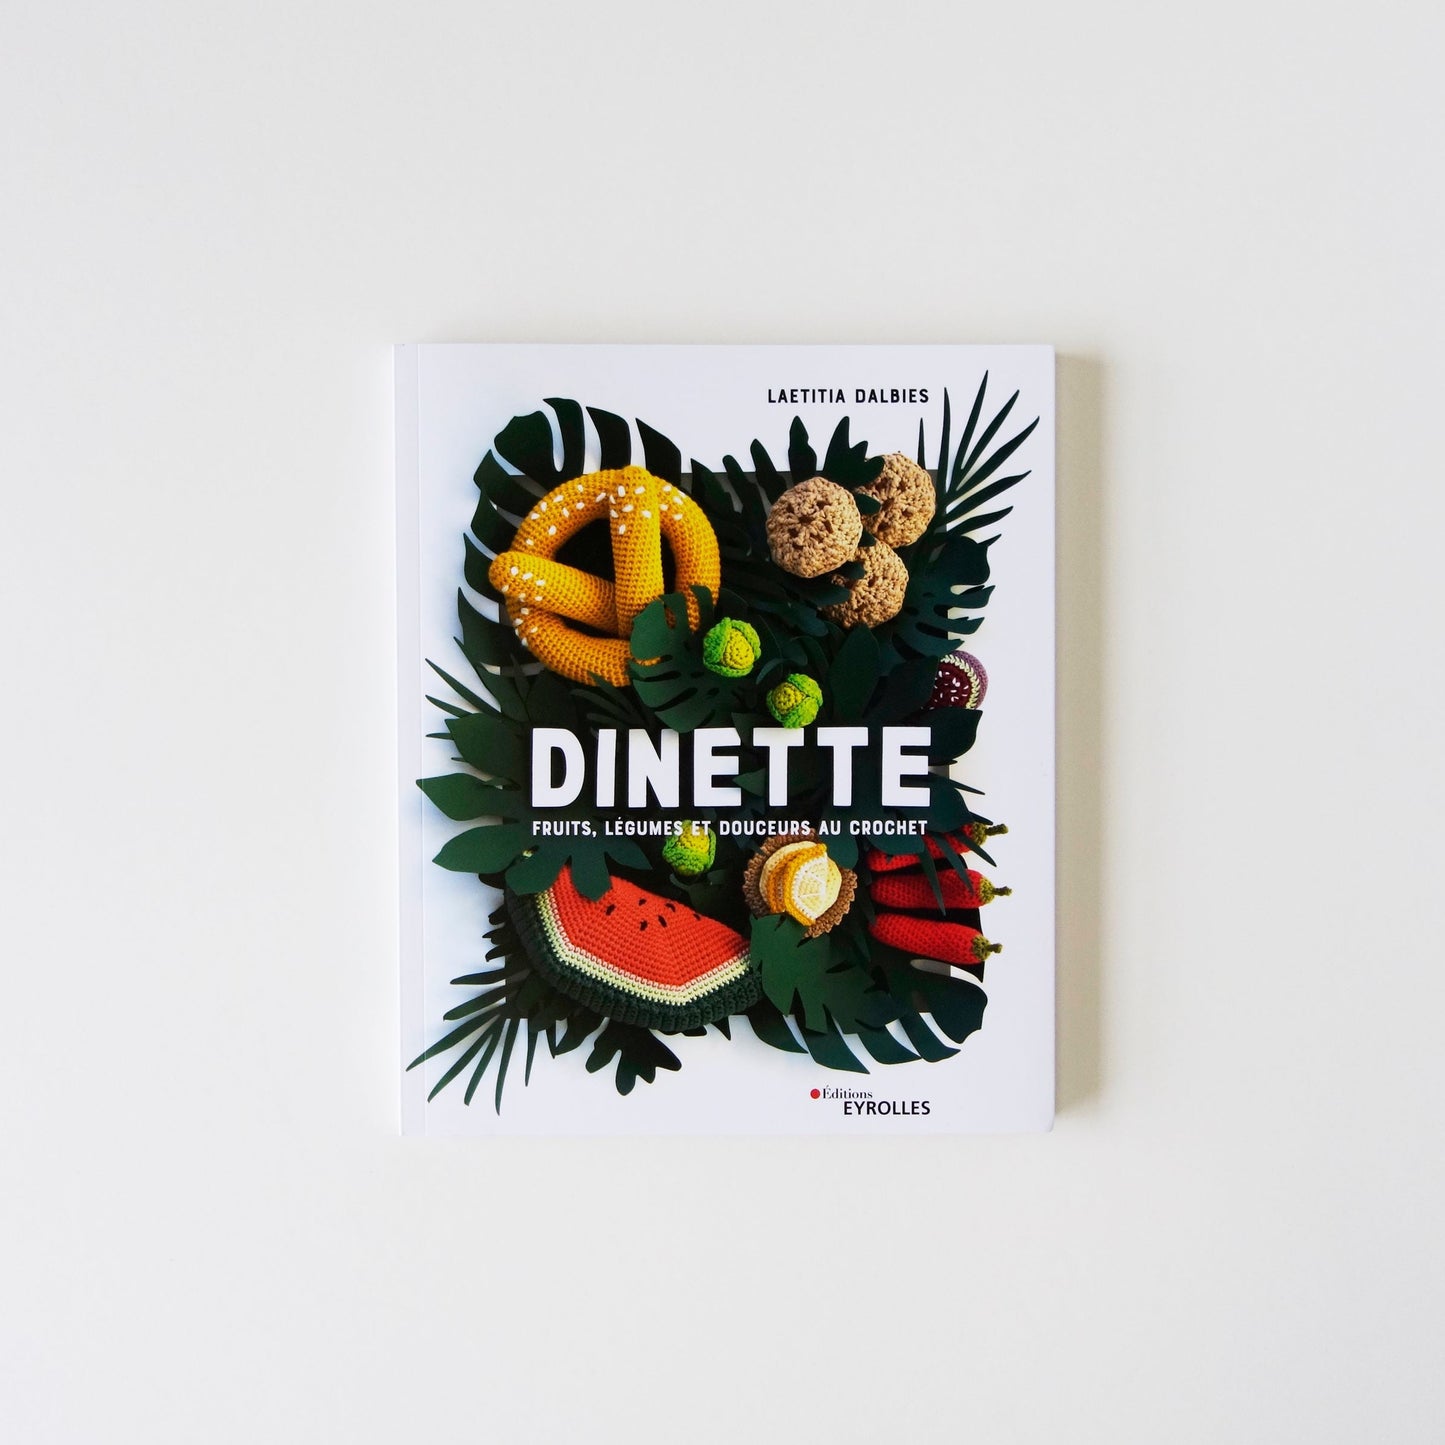 Dinette - Crochet fruits, vegetables and sweets